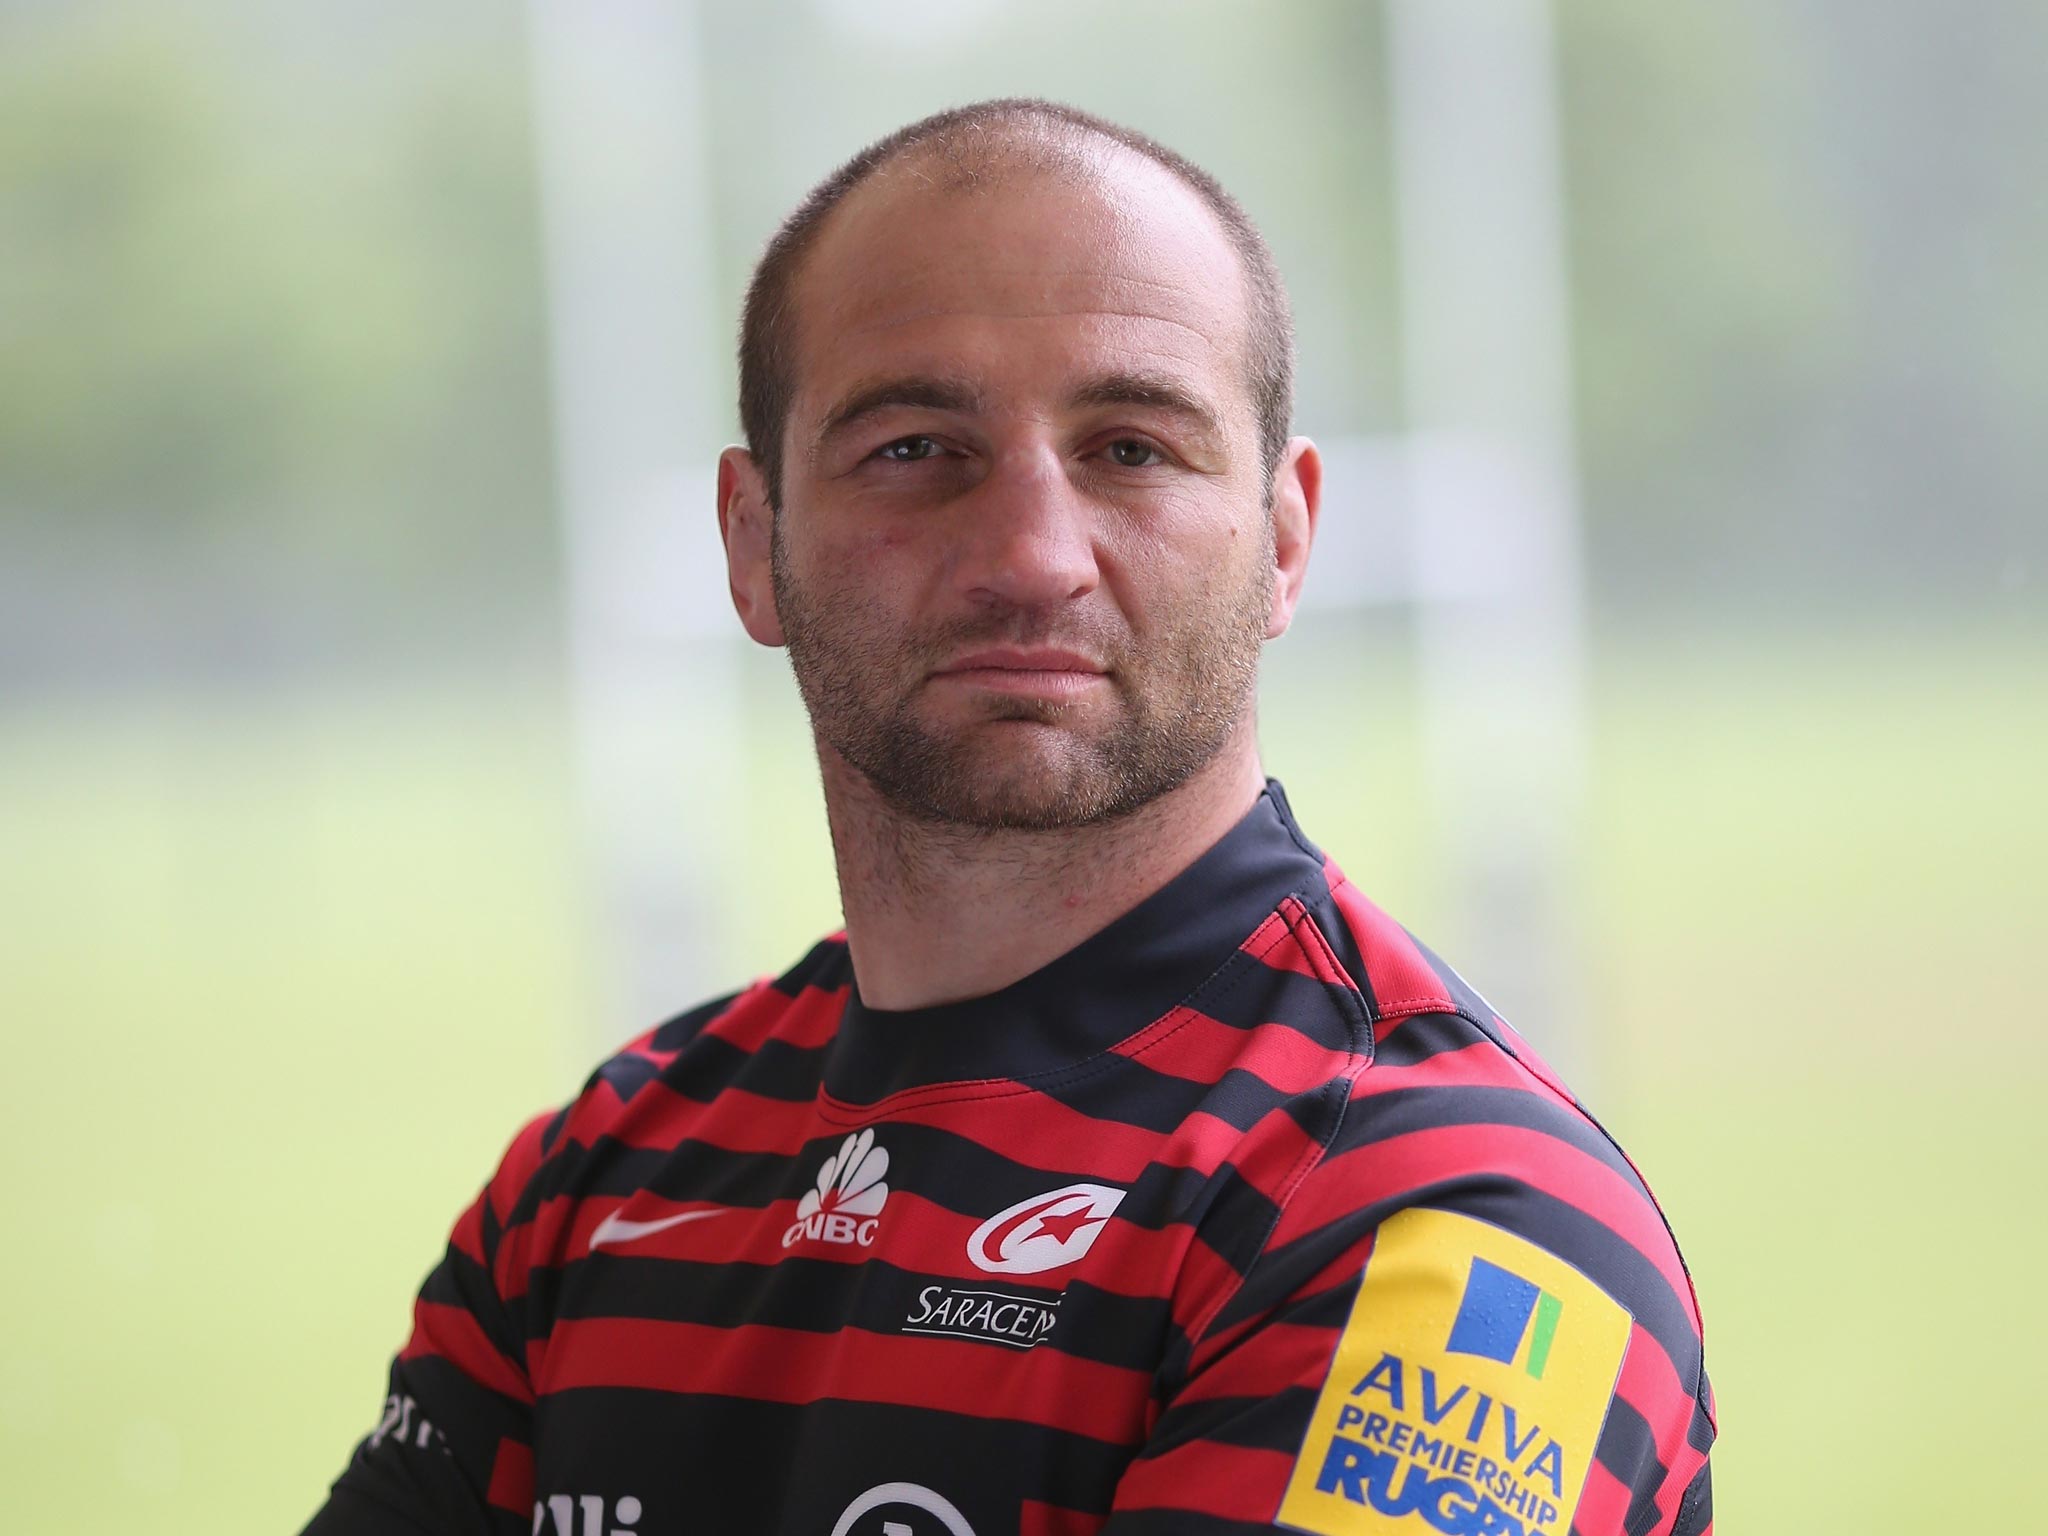 Steve Borthwick: ‘I’d happily go back and do it all over
again,’ he says of his amazing career with Bath, Sarries and England ahead of the Premiership final tomorrow